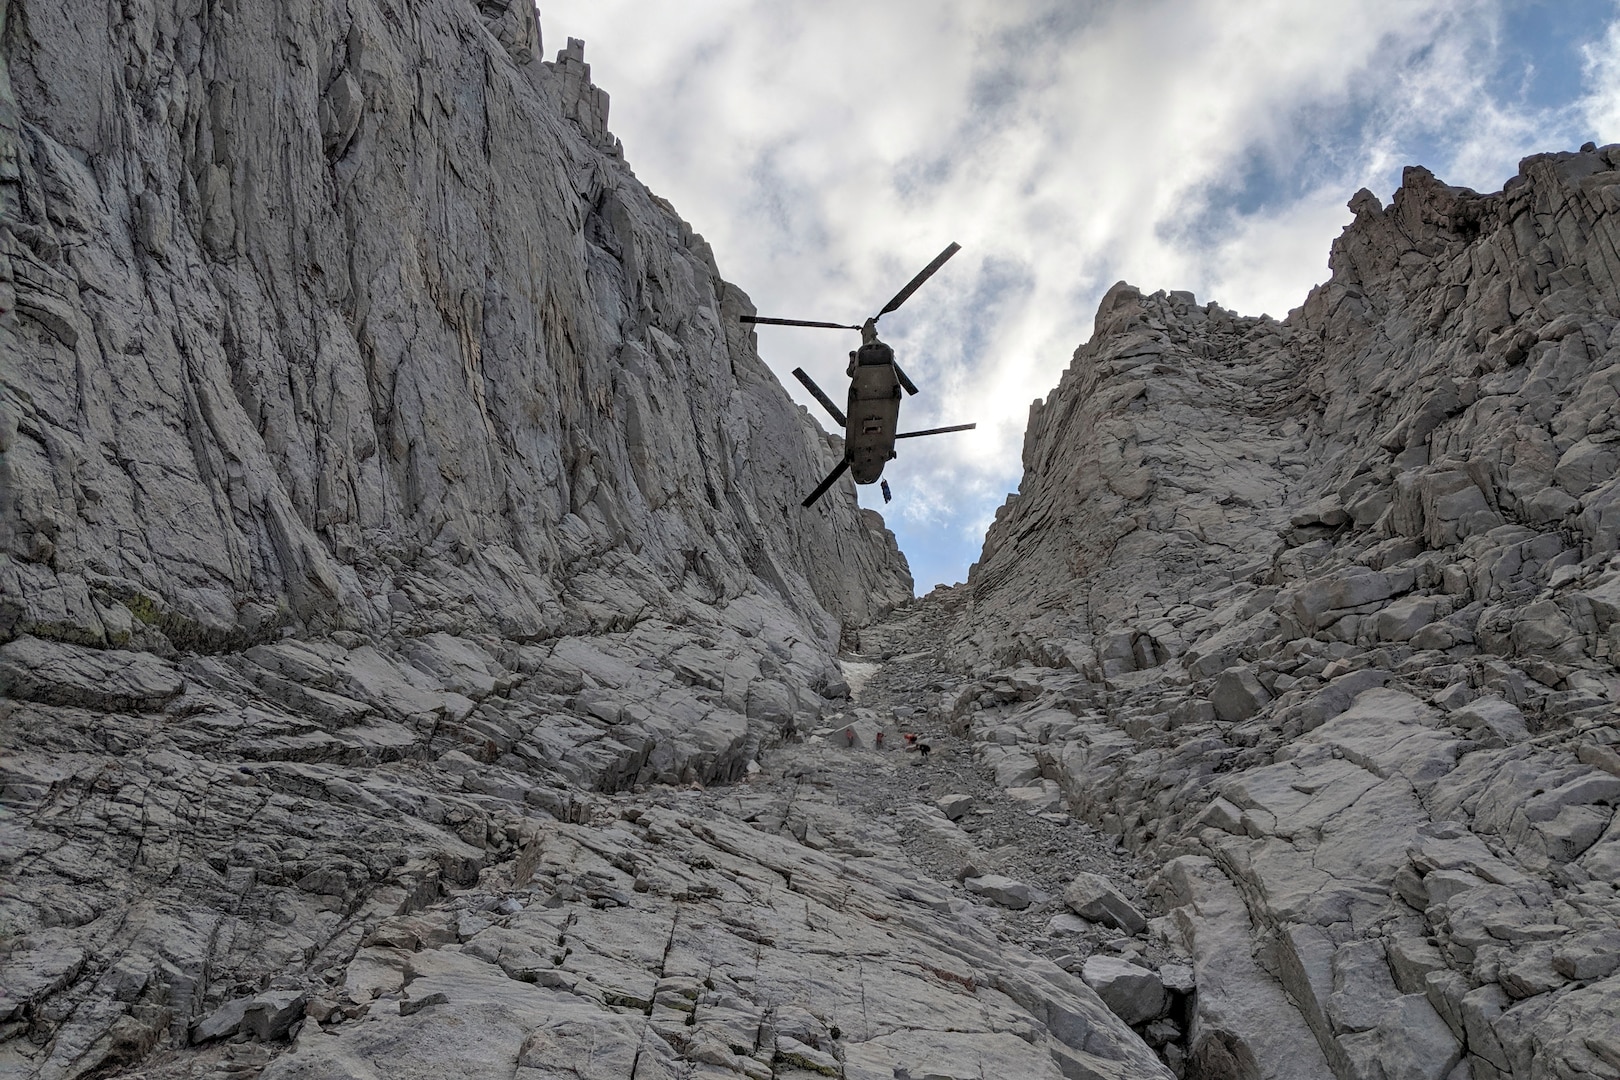 Army CH-47F Chinook helicopter assigned to B Company, 1st
Battalion, 126th Aviation Regiment, California Army National Guard, assisted by Inyo County Search and Rescue, hovers while hoisting injured hiker at 13,800 feet on Mount Whitney, Inyo County, California, August 25, 2019 (Courtesy Inyo County Search and Rescue)